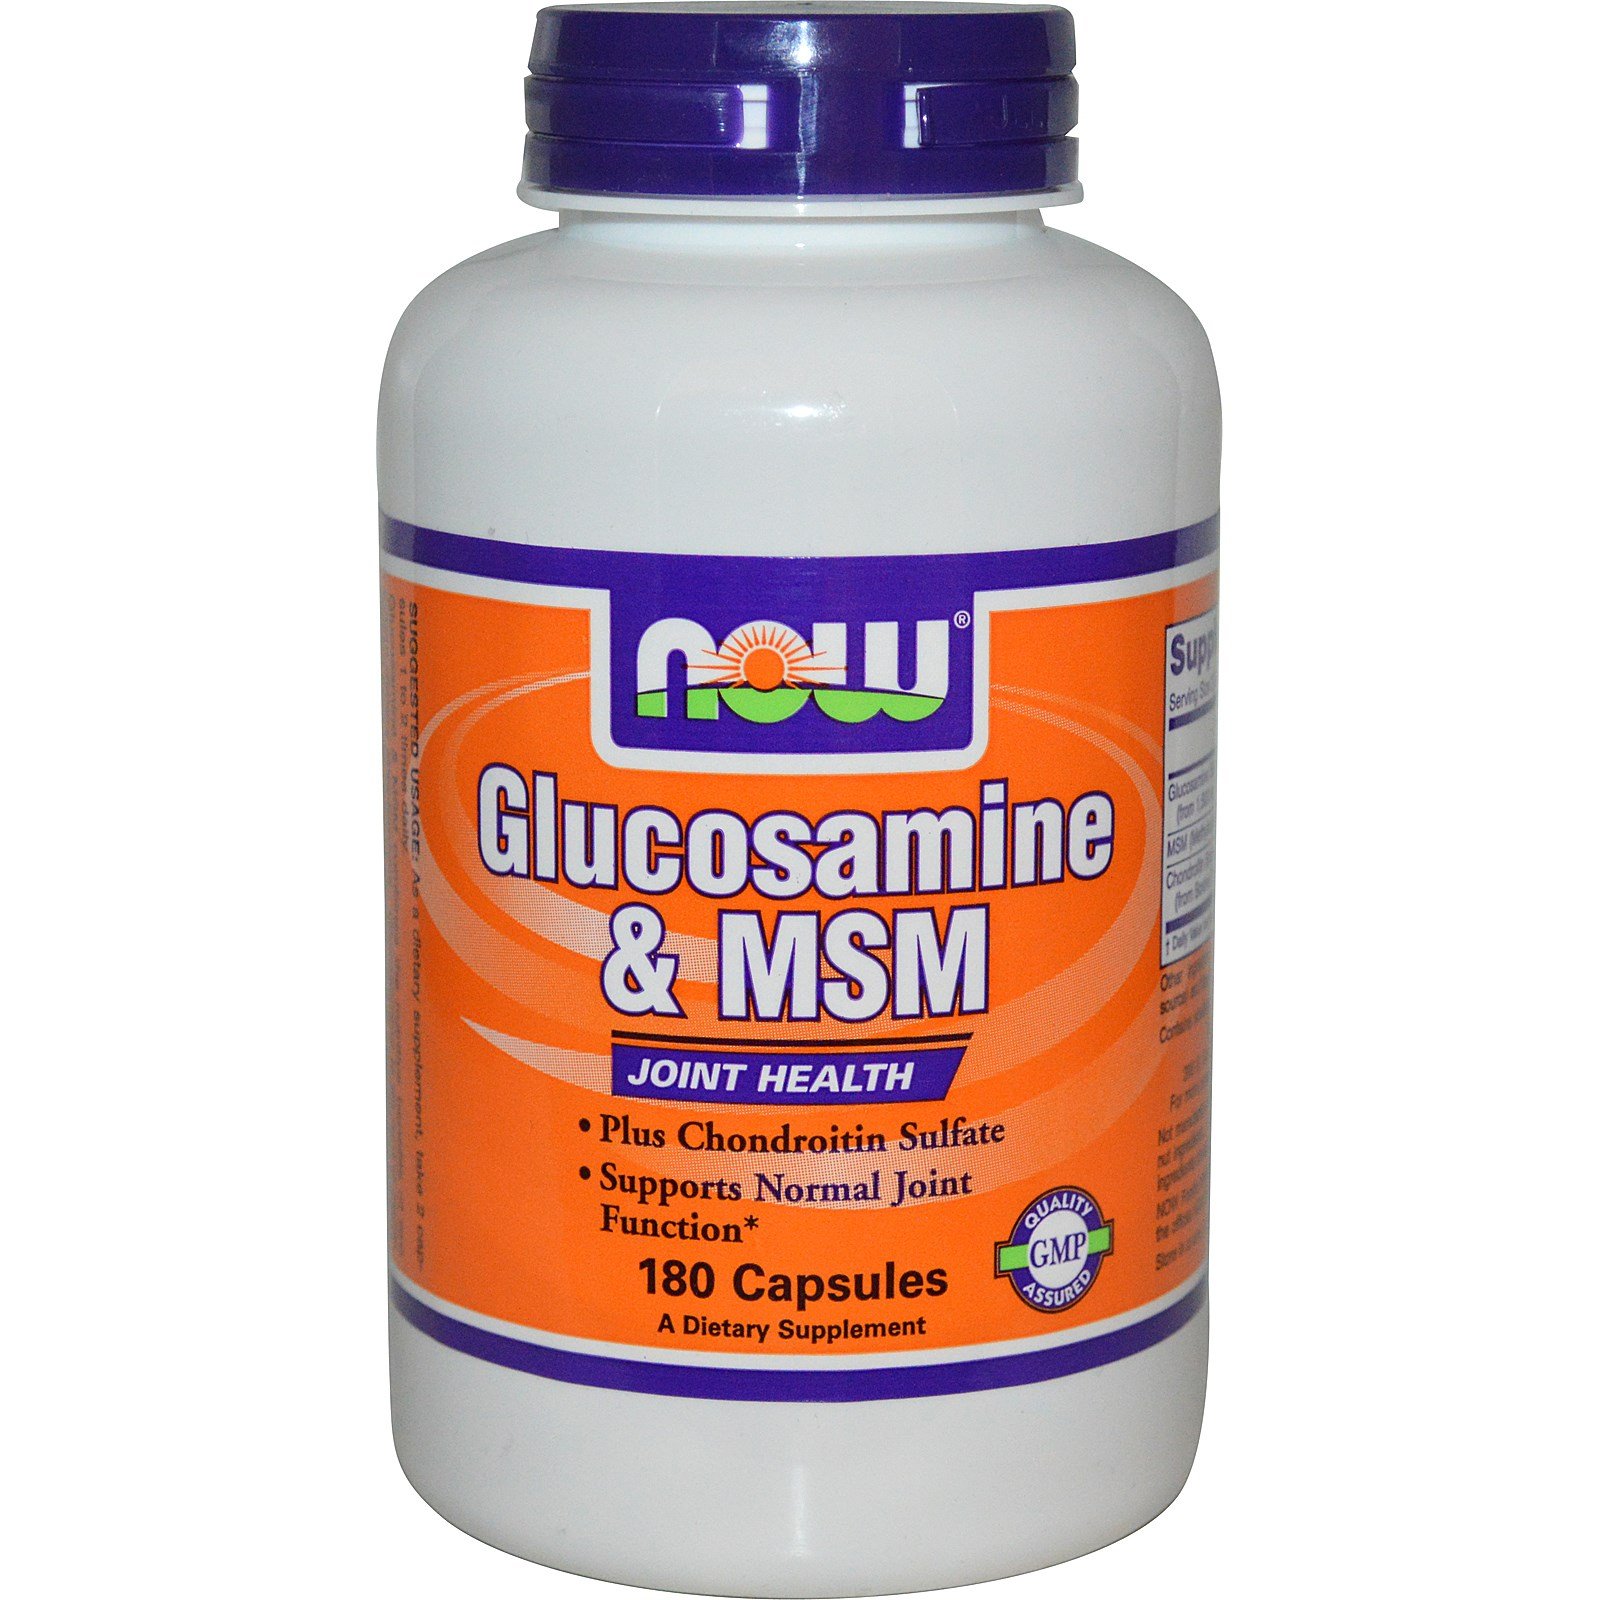 Glucosamine & MSM, 180 pcs, Now. For joints and ligaments. General Health Ligament and Joint strengthening 